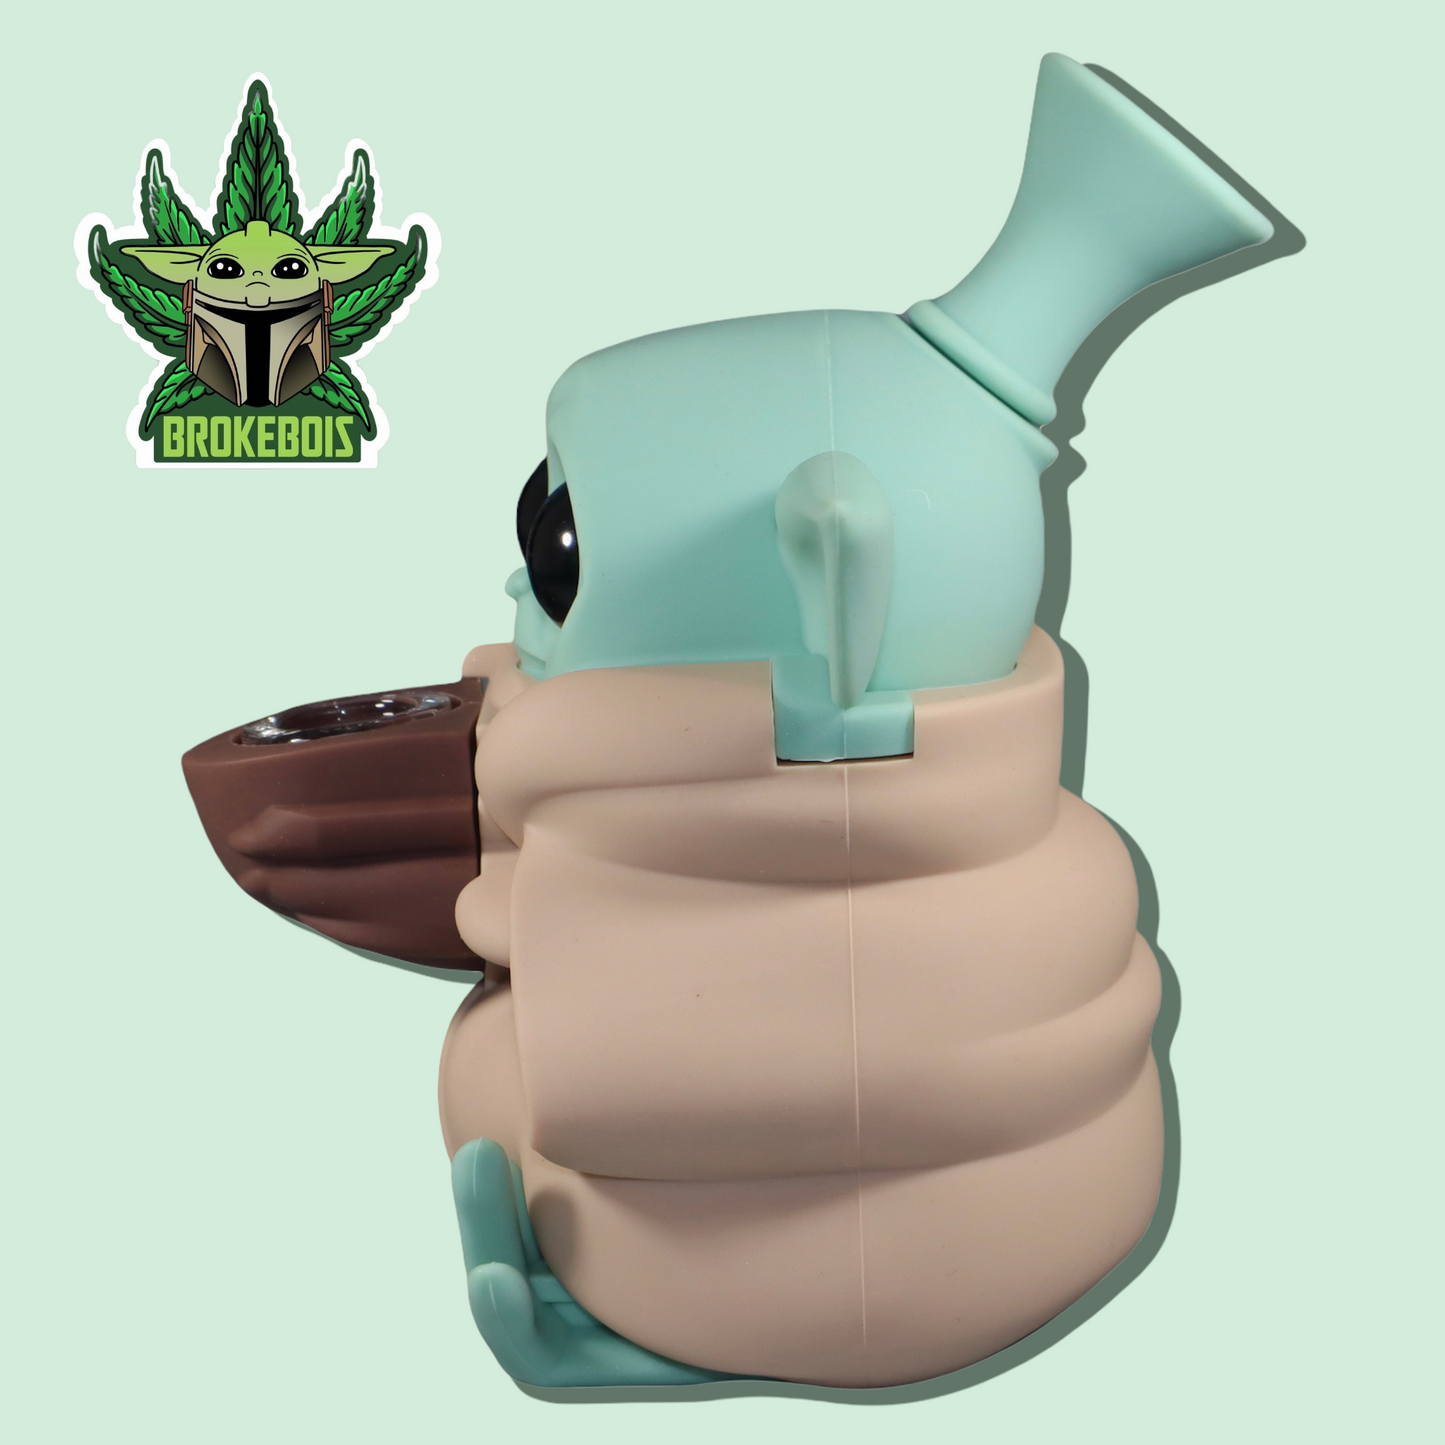 Star Wars Baby Yoda Silicone Water Pipe - Grogu " The Child"